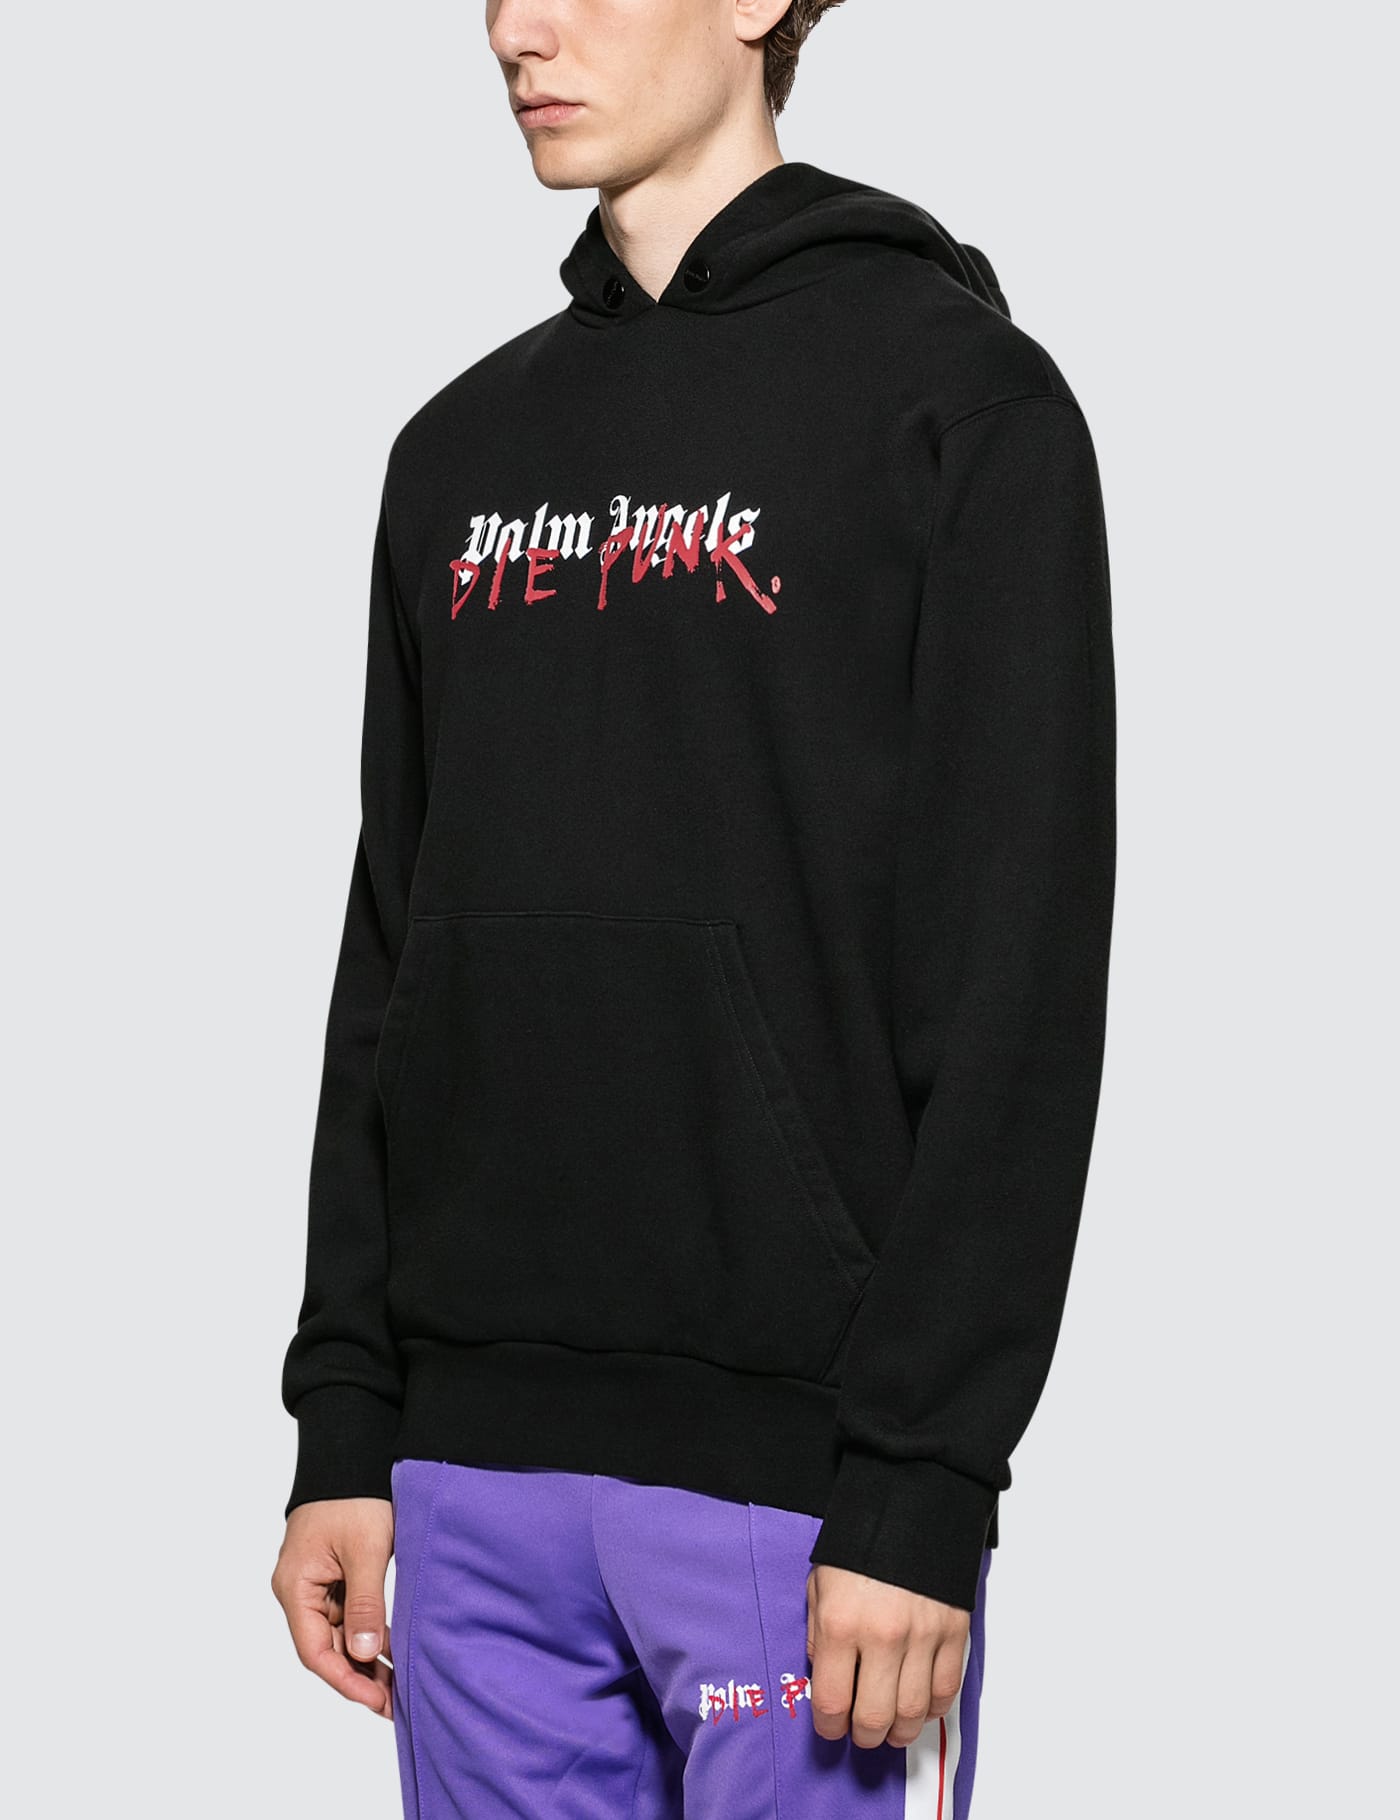 Palm Angels - Pc Die Punk Hoodie | HBX - Globally Curated Fashion 